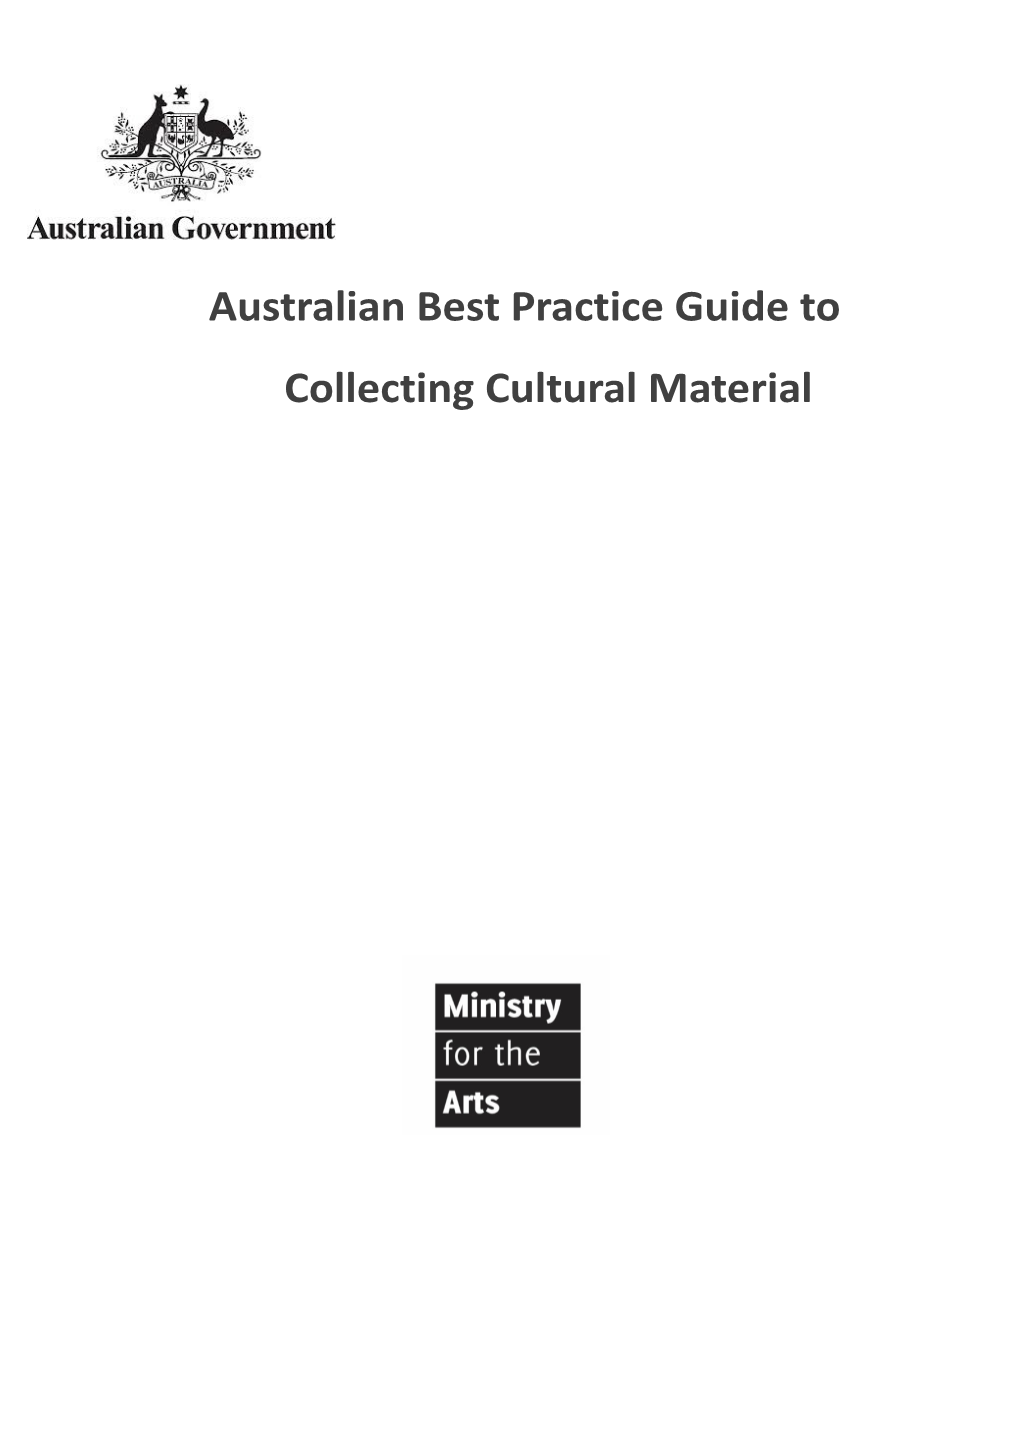 Australian Best Practice Guide to Collecting Cultural Material